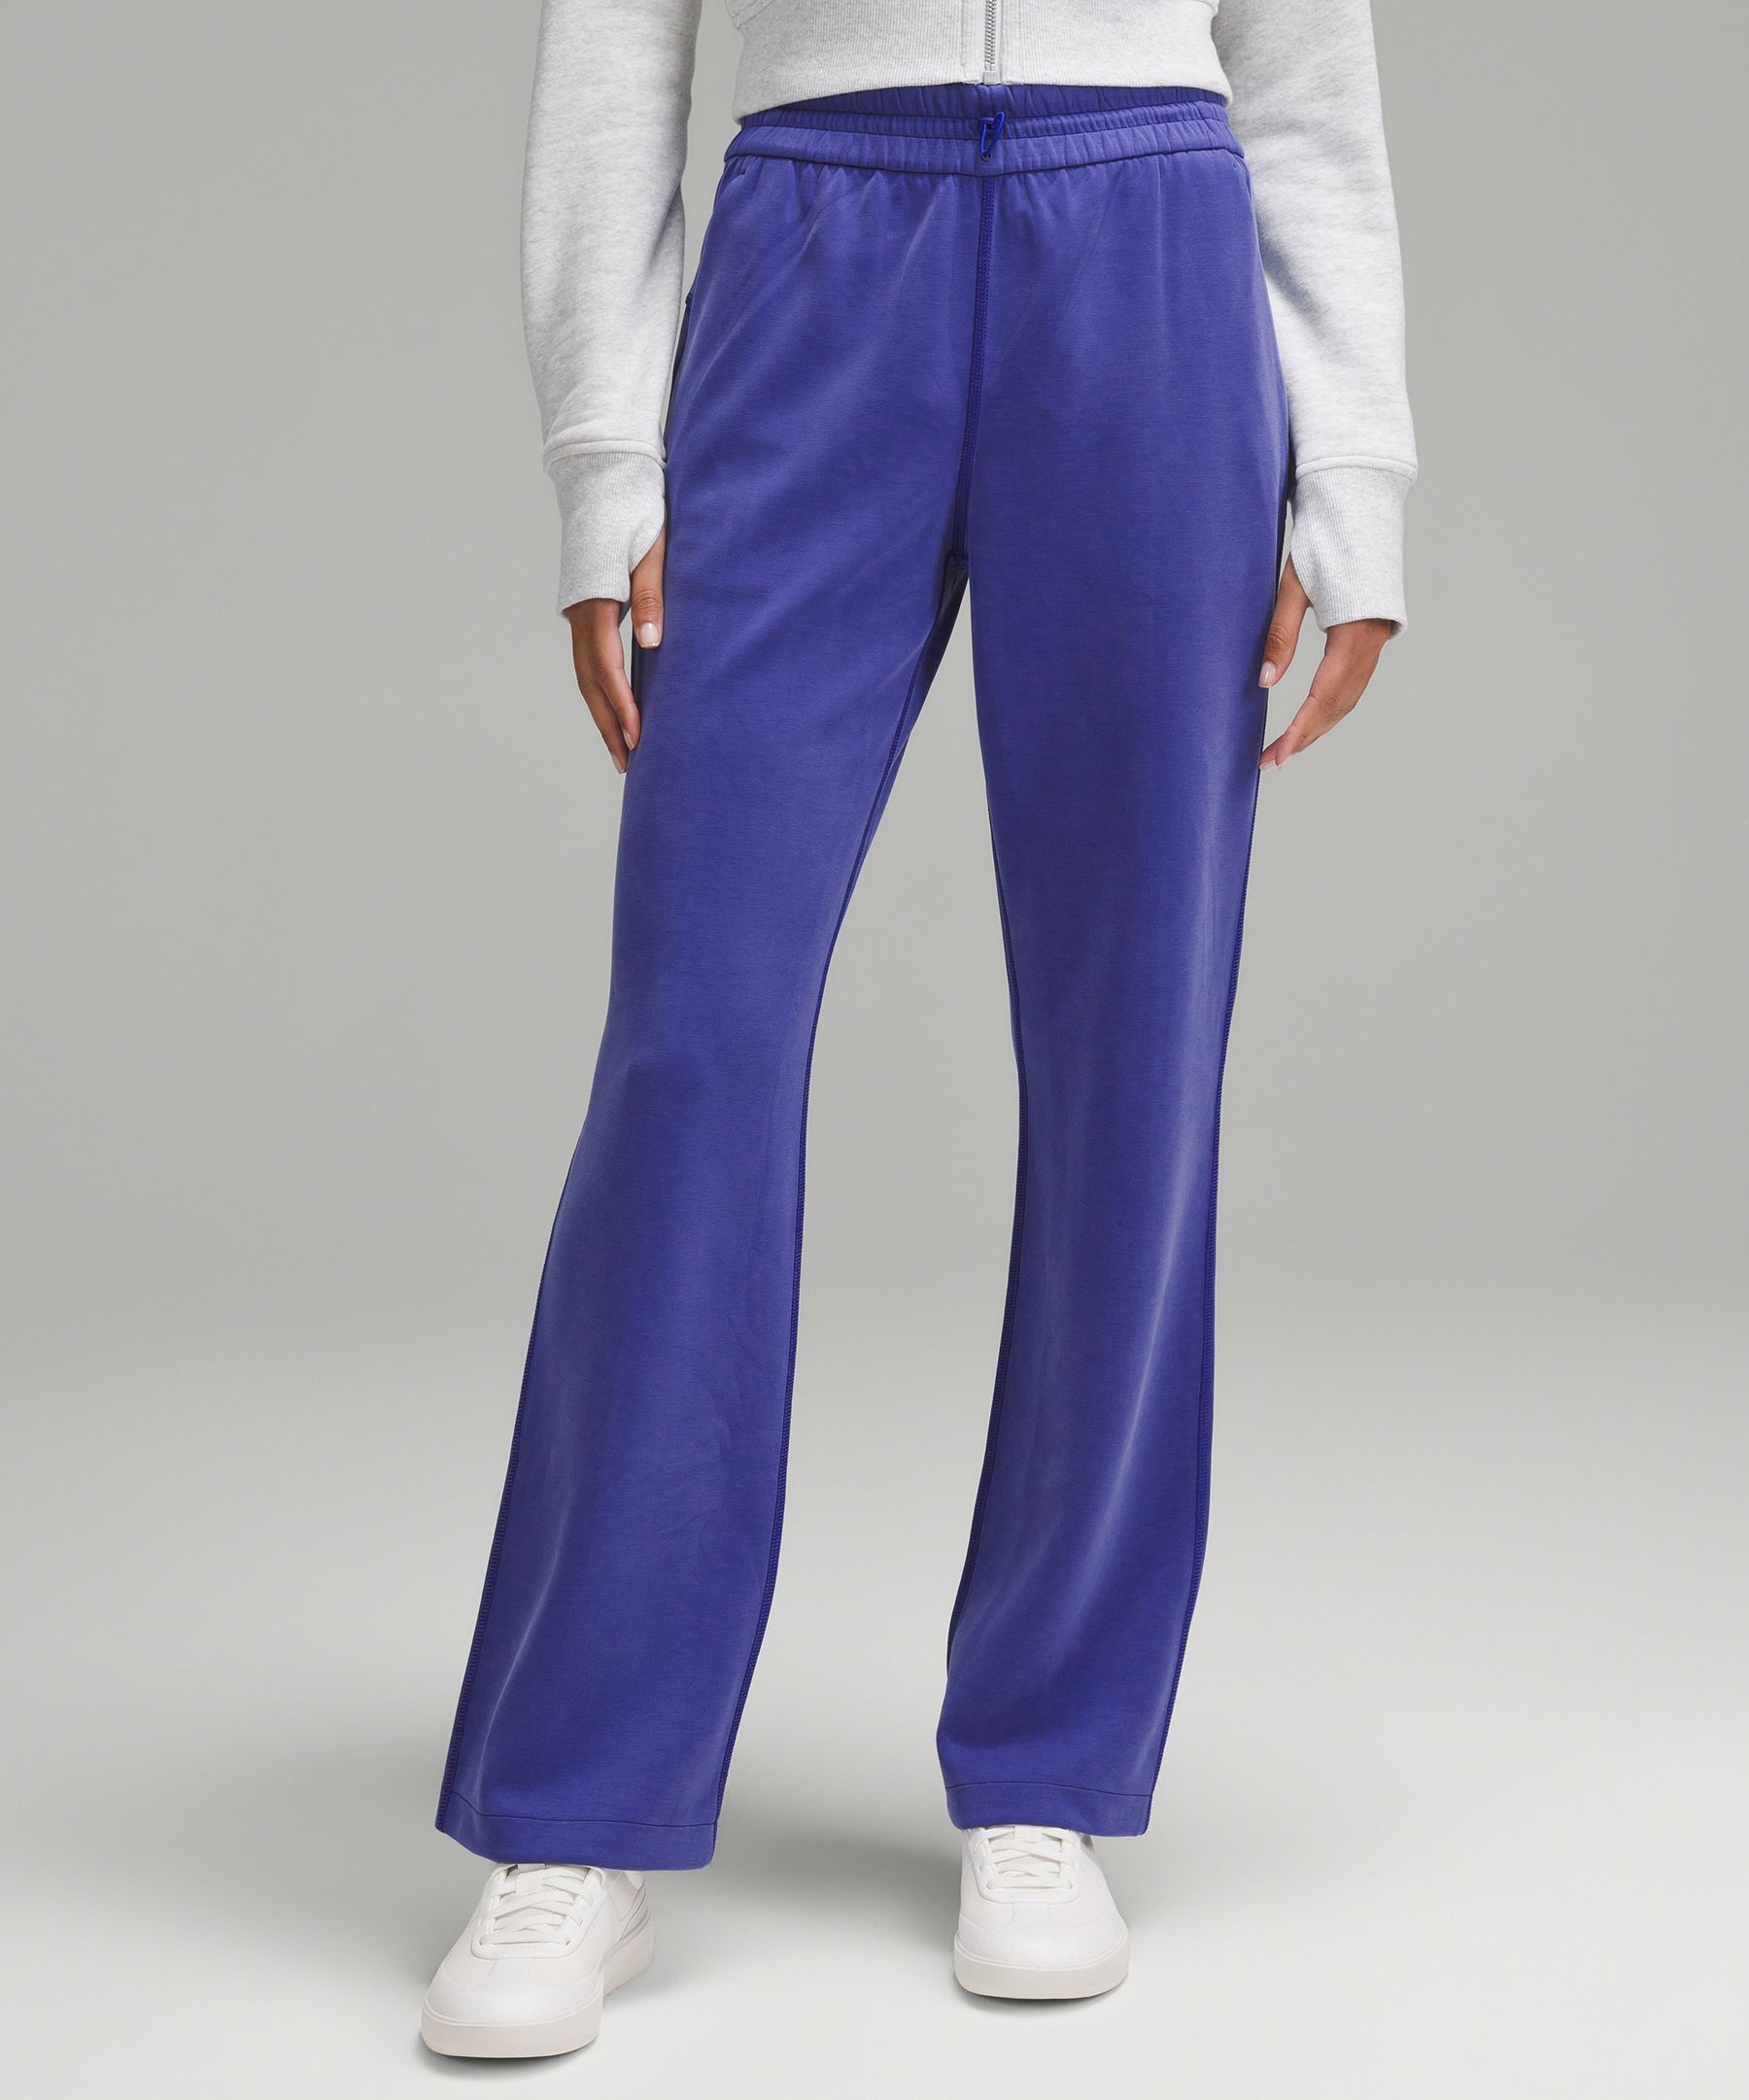 Brushed softstreme HR pants in natural ivory…pockets are totally